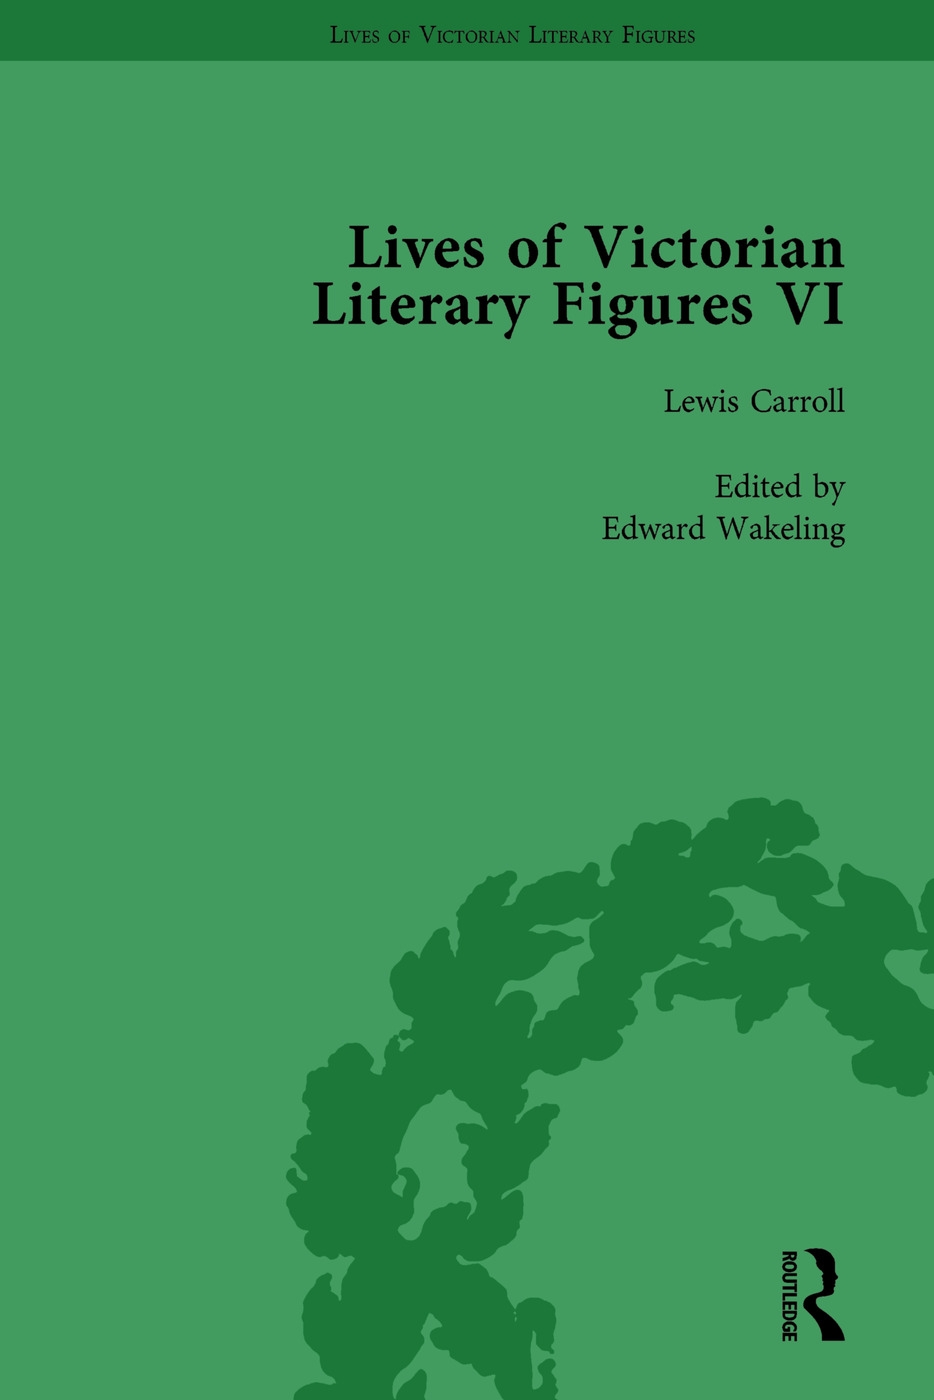 Lives of Victorian Literary Figures, Part VI, Volume 1: Lewis Carroll, Robert Louis Stevenson and Algernon Charles Swinburne by Their Contemporaries